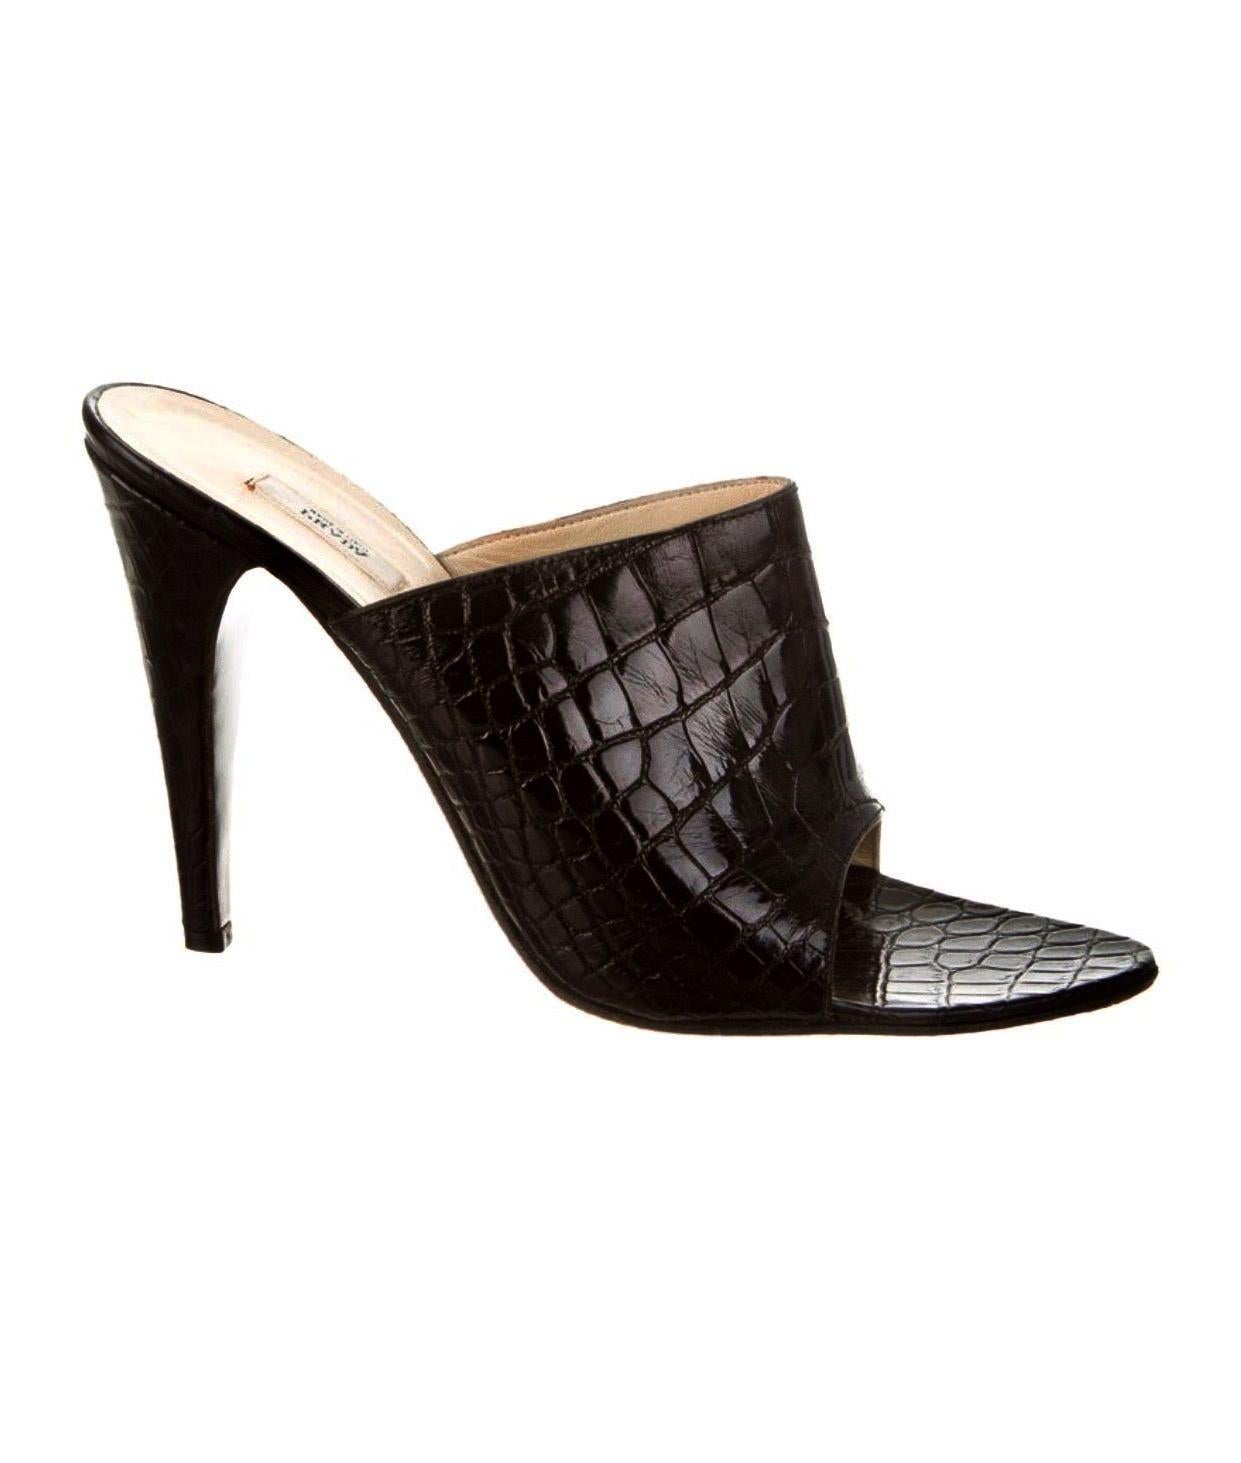 Beautiful Prada High Heel Sandals
Real crocodile skin in black color - no print
From Prada's exotic skin collection
Classic style
Made in Italy
Size 39 EU
Comes with Prada dustbag
Retailed for 2999$
